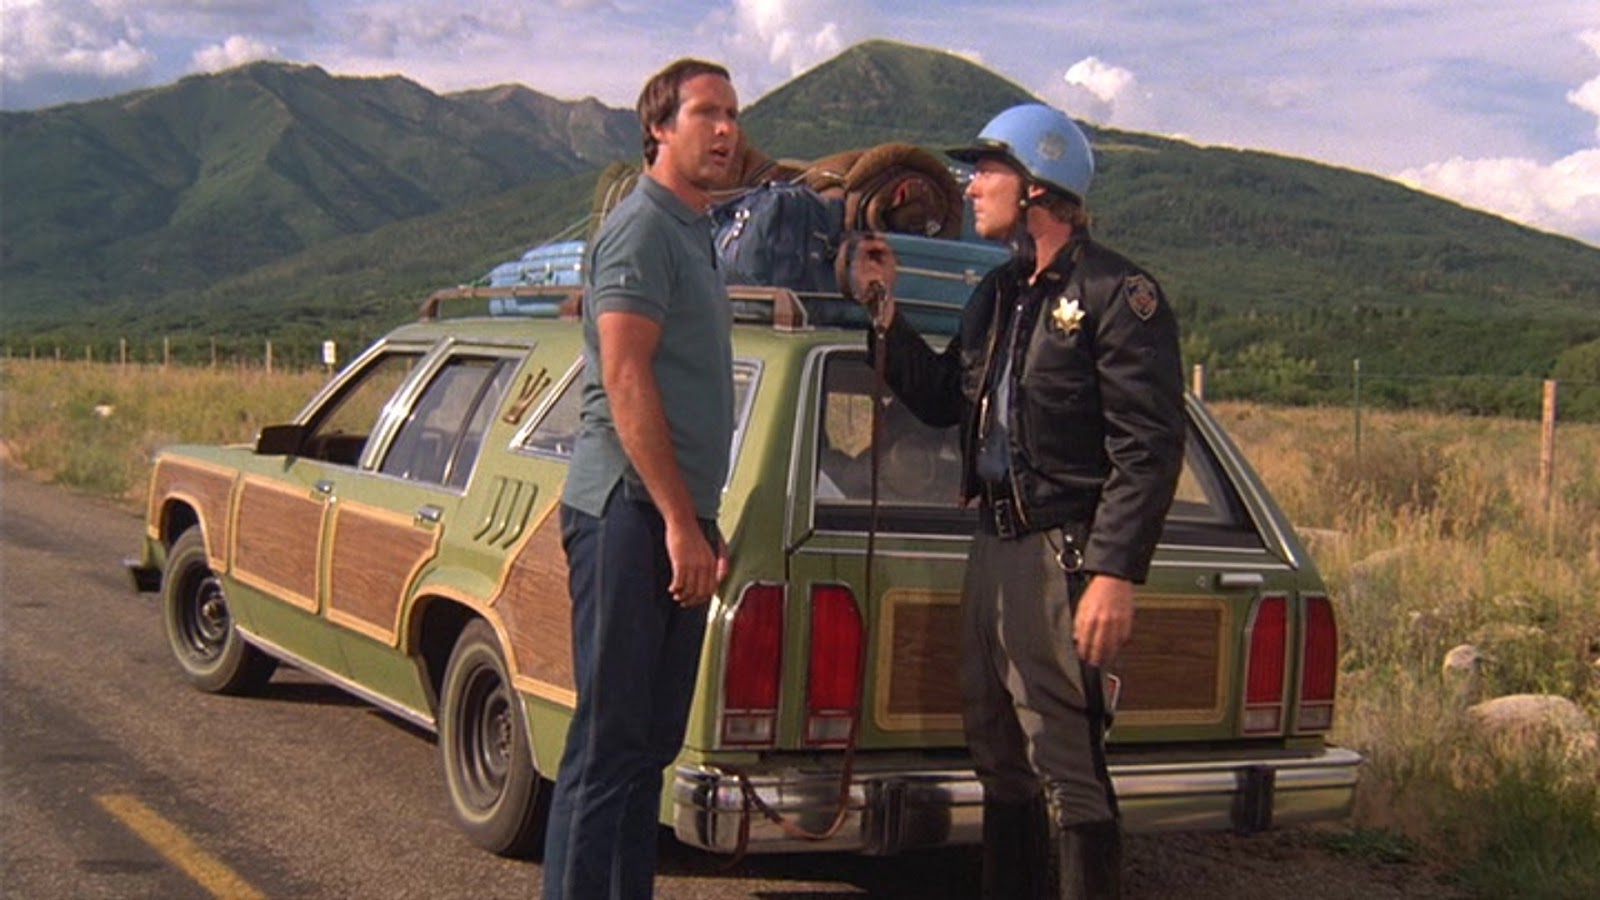 National lampoon's vacation (1983) .